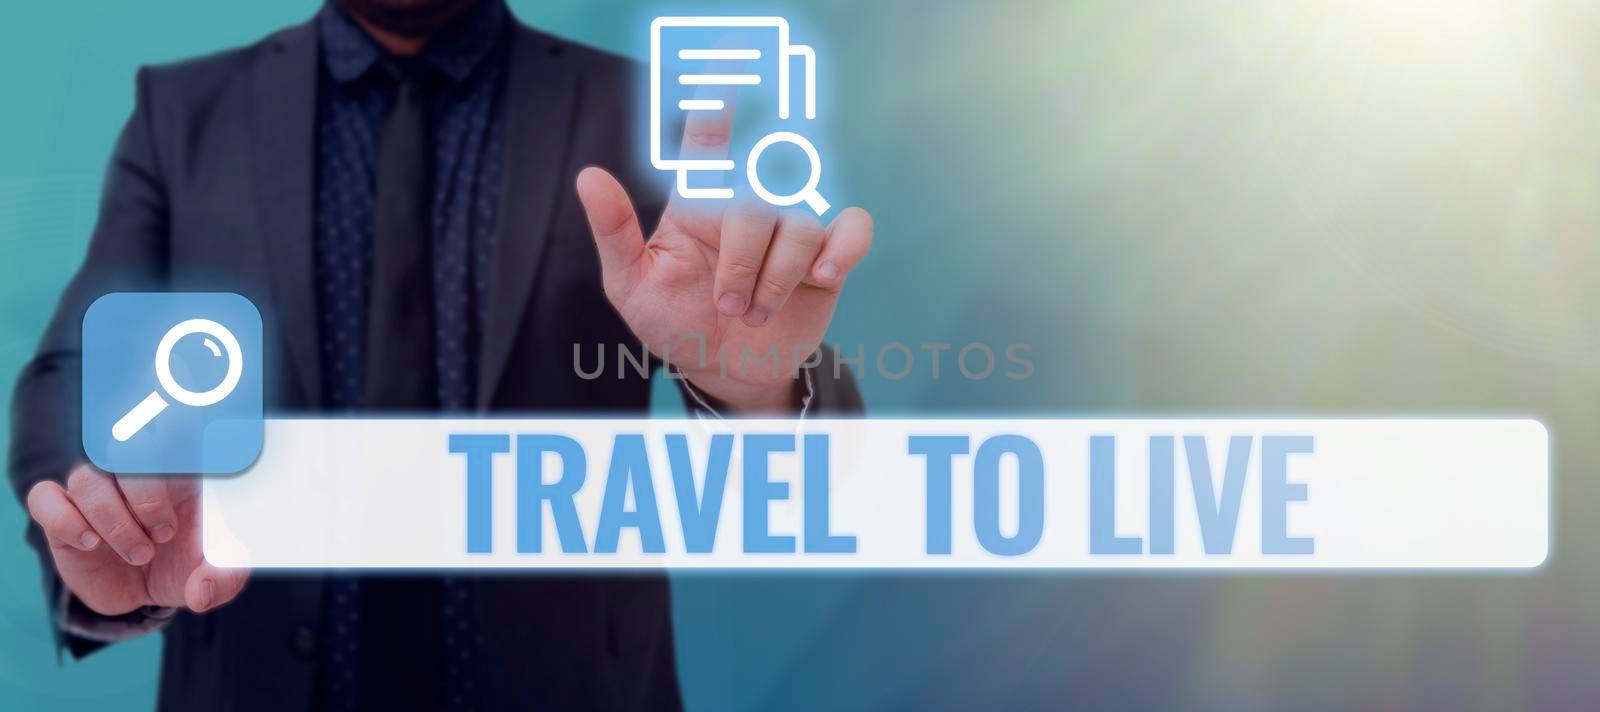 Inspiration showing sign Travel To Live, Business showcase Get knowledge and exciting adventures by going on trips Businessman in suit holding open palm symbolizing successful teamwork.